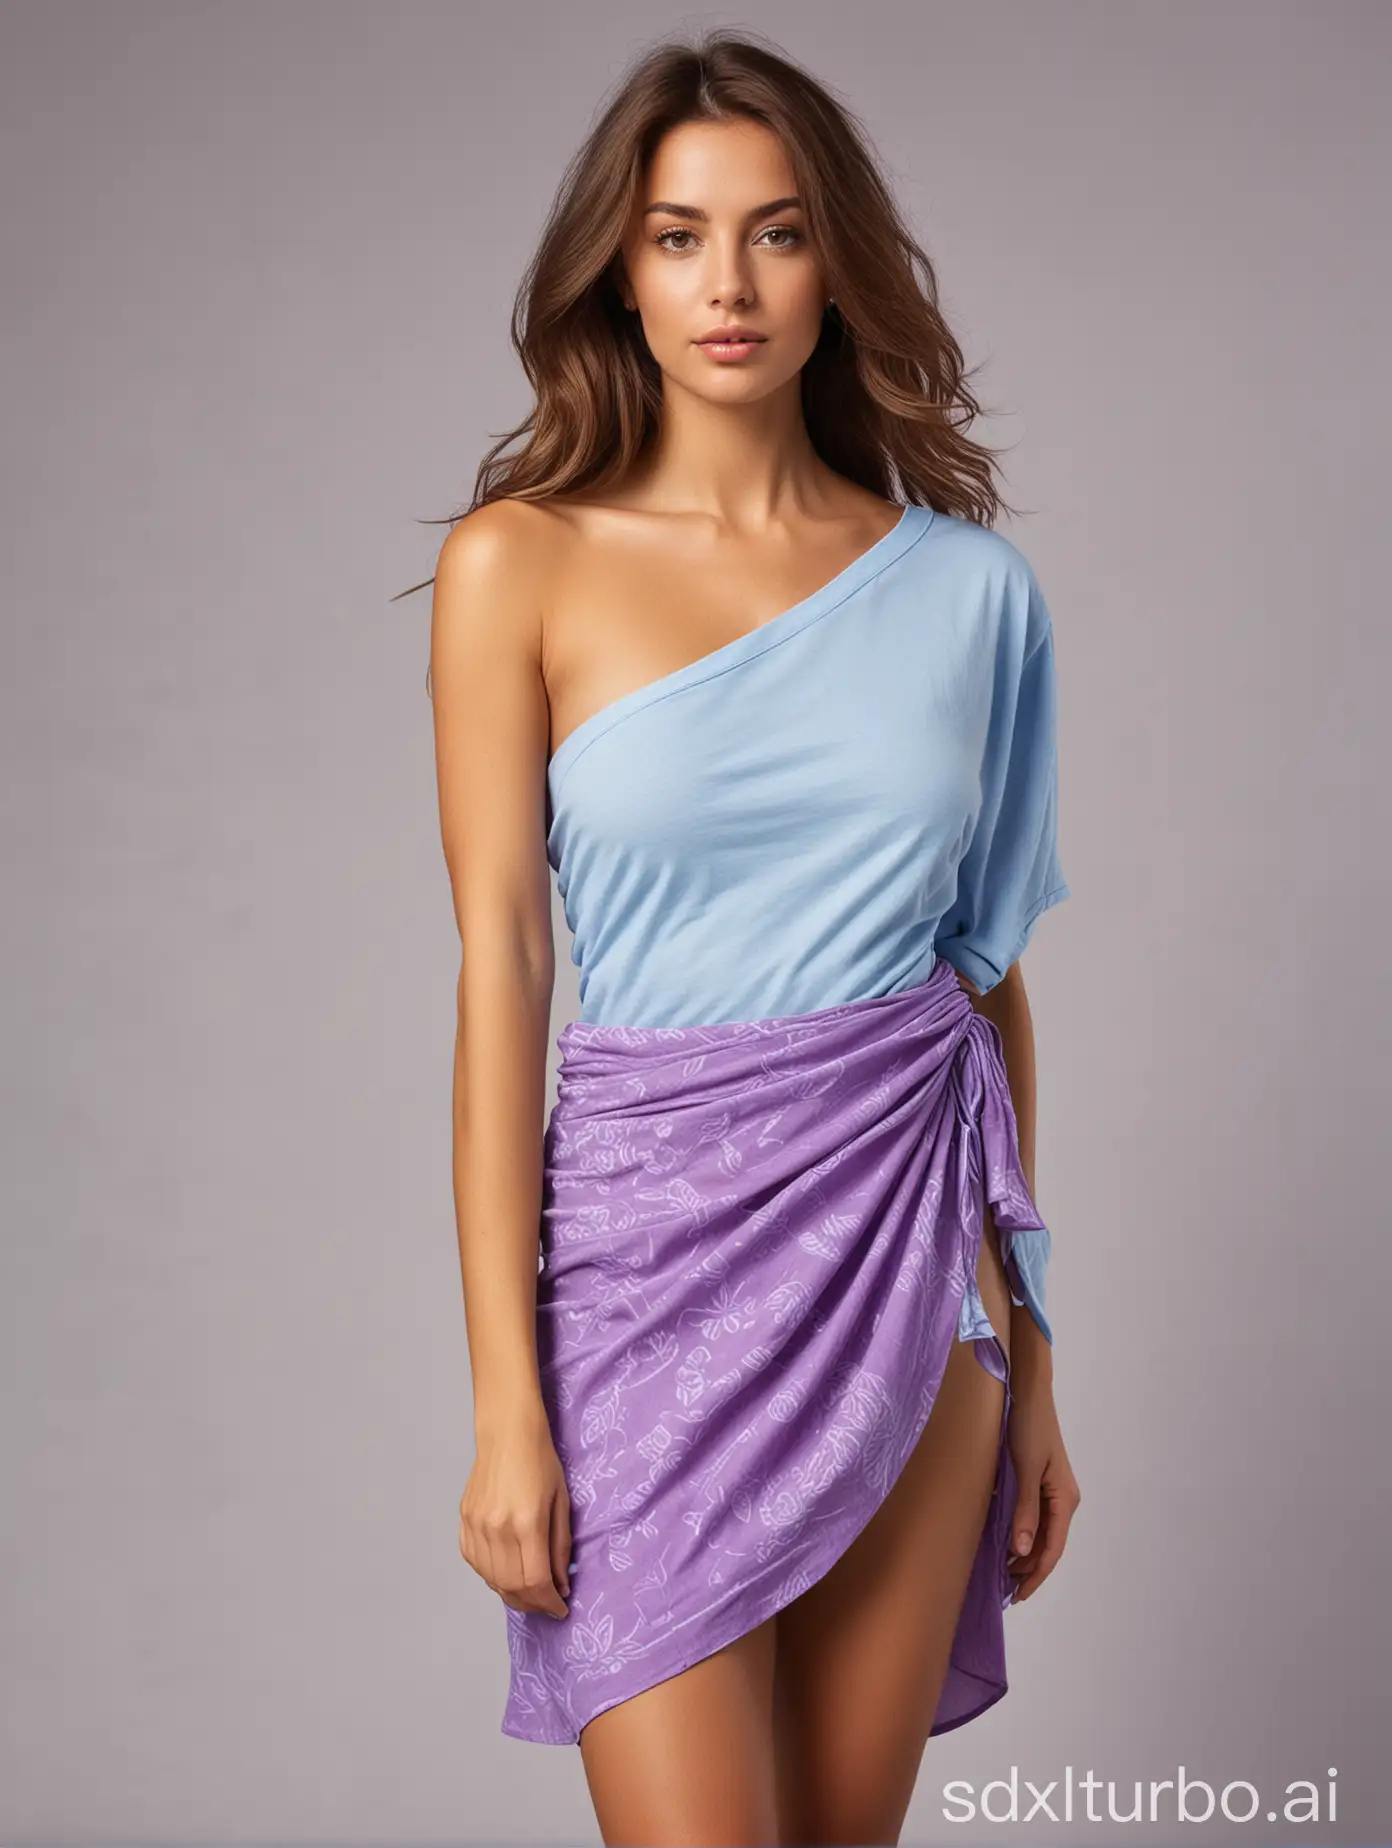 Slim-Woman-in-Light-Blue-Oversized-TShirt-and-Purple-Sarong